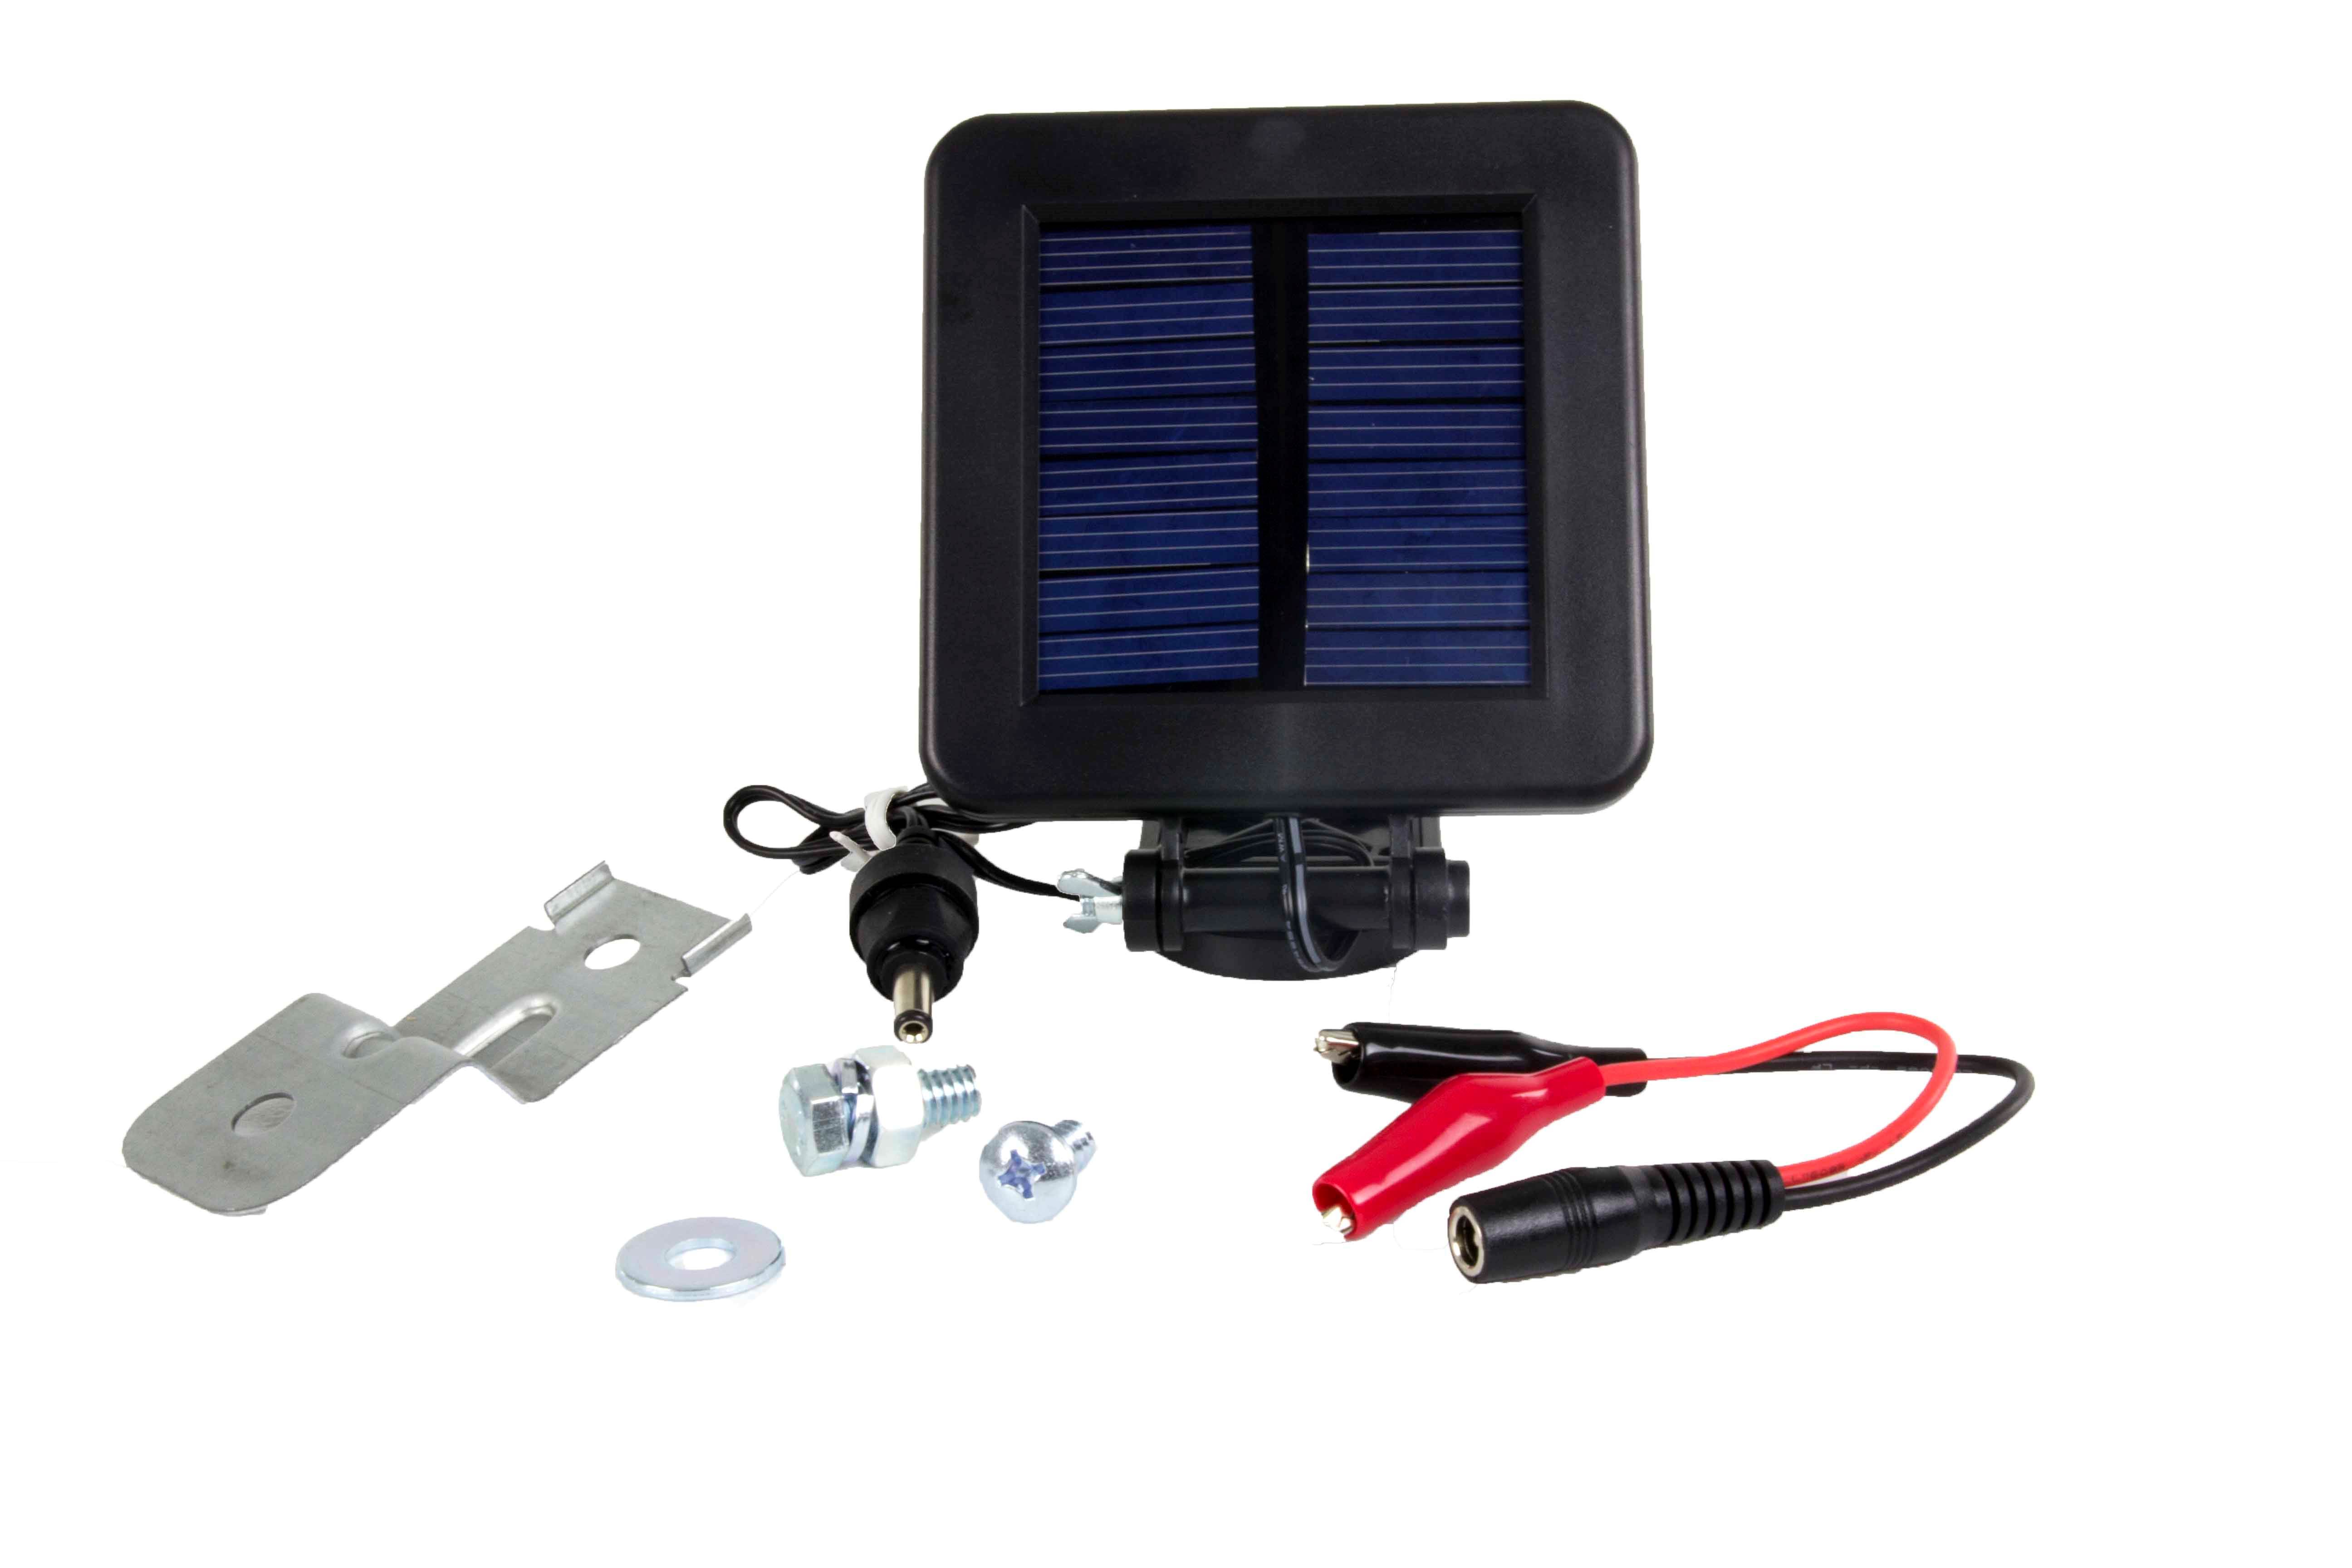 NEW! MOULTRIE Game Feeder 6 Volt Deluxe Solar Power Panel w/ Mounting Bracket - image 3 of 5